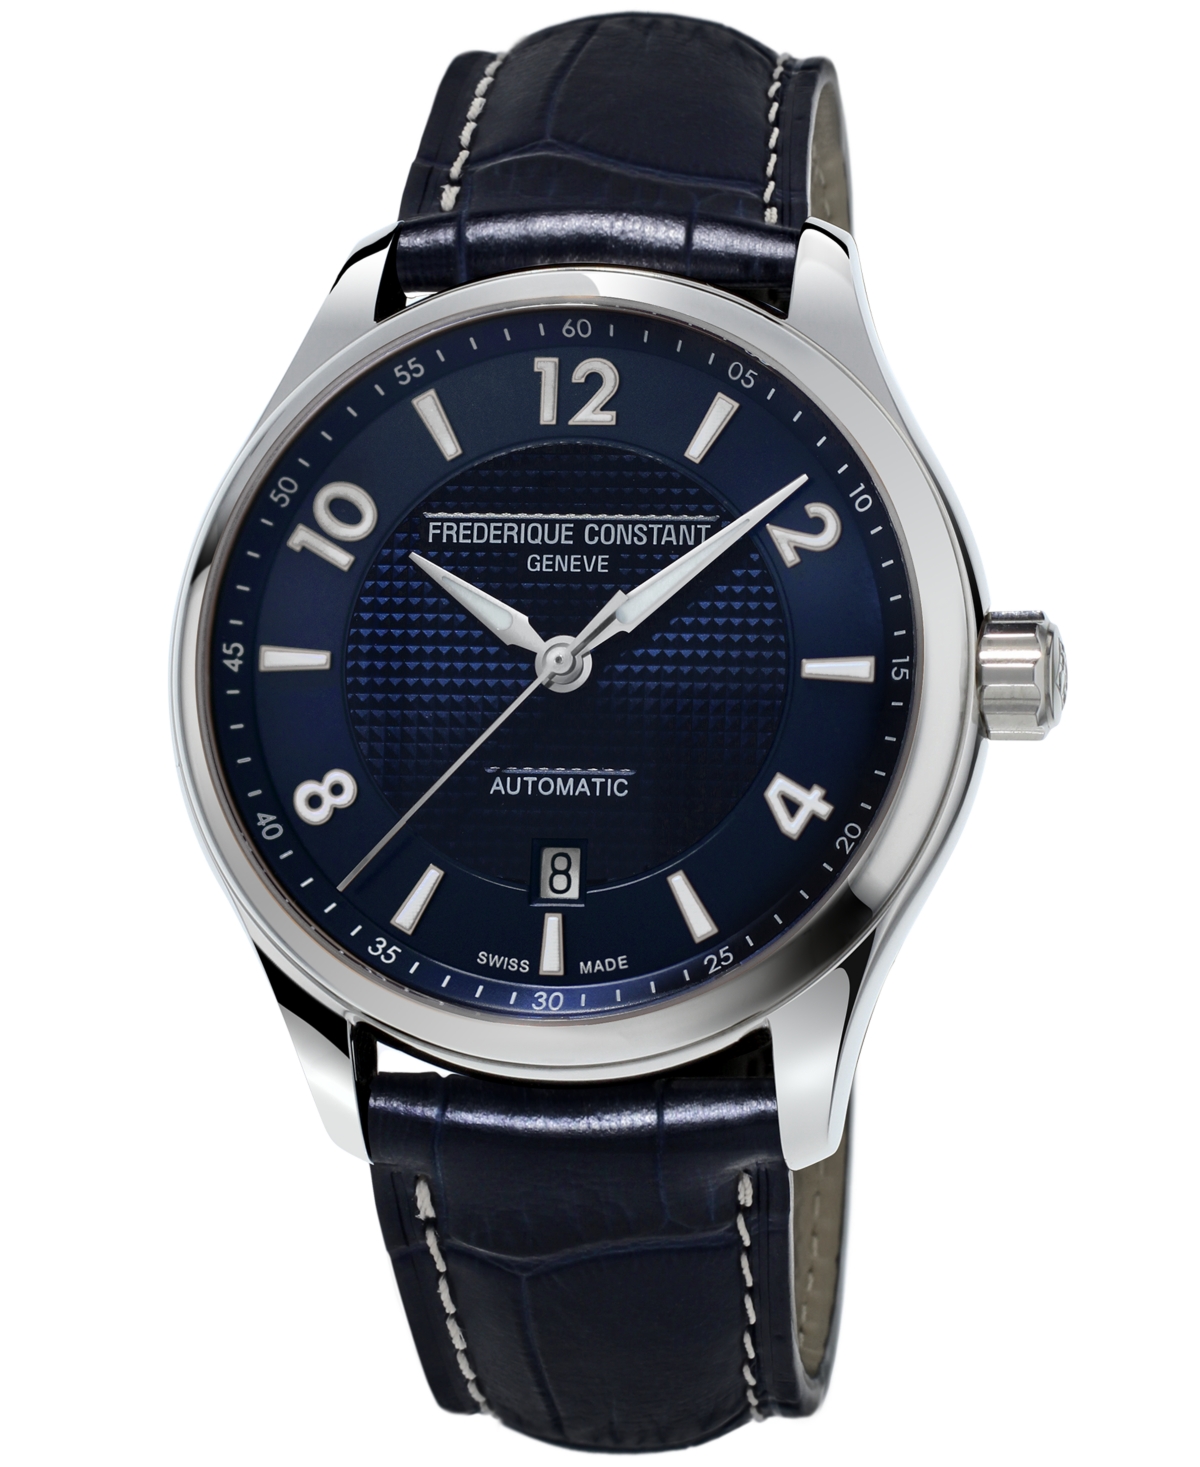 FREDERIQUE CONSTANT MEN'S SWISS AUTOMATIC RUNABOUT BLUE LEATHER STRAP WATCH 42MM